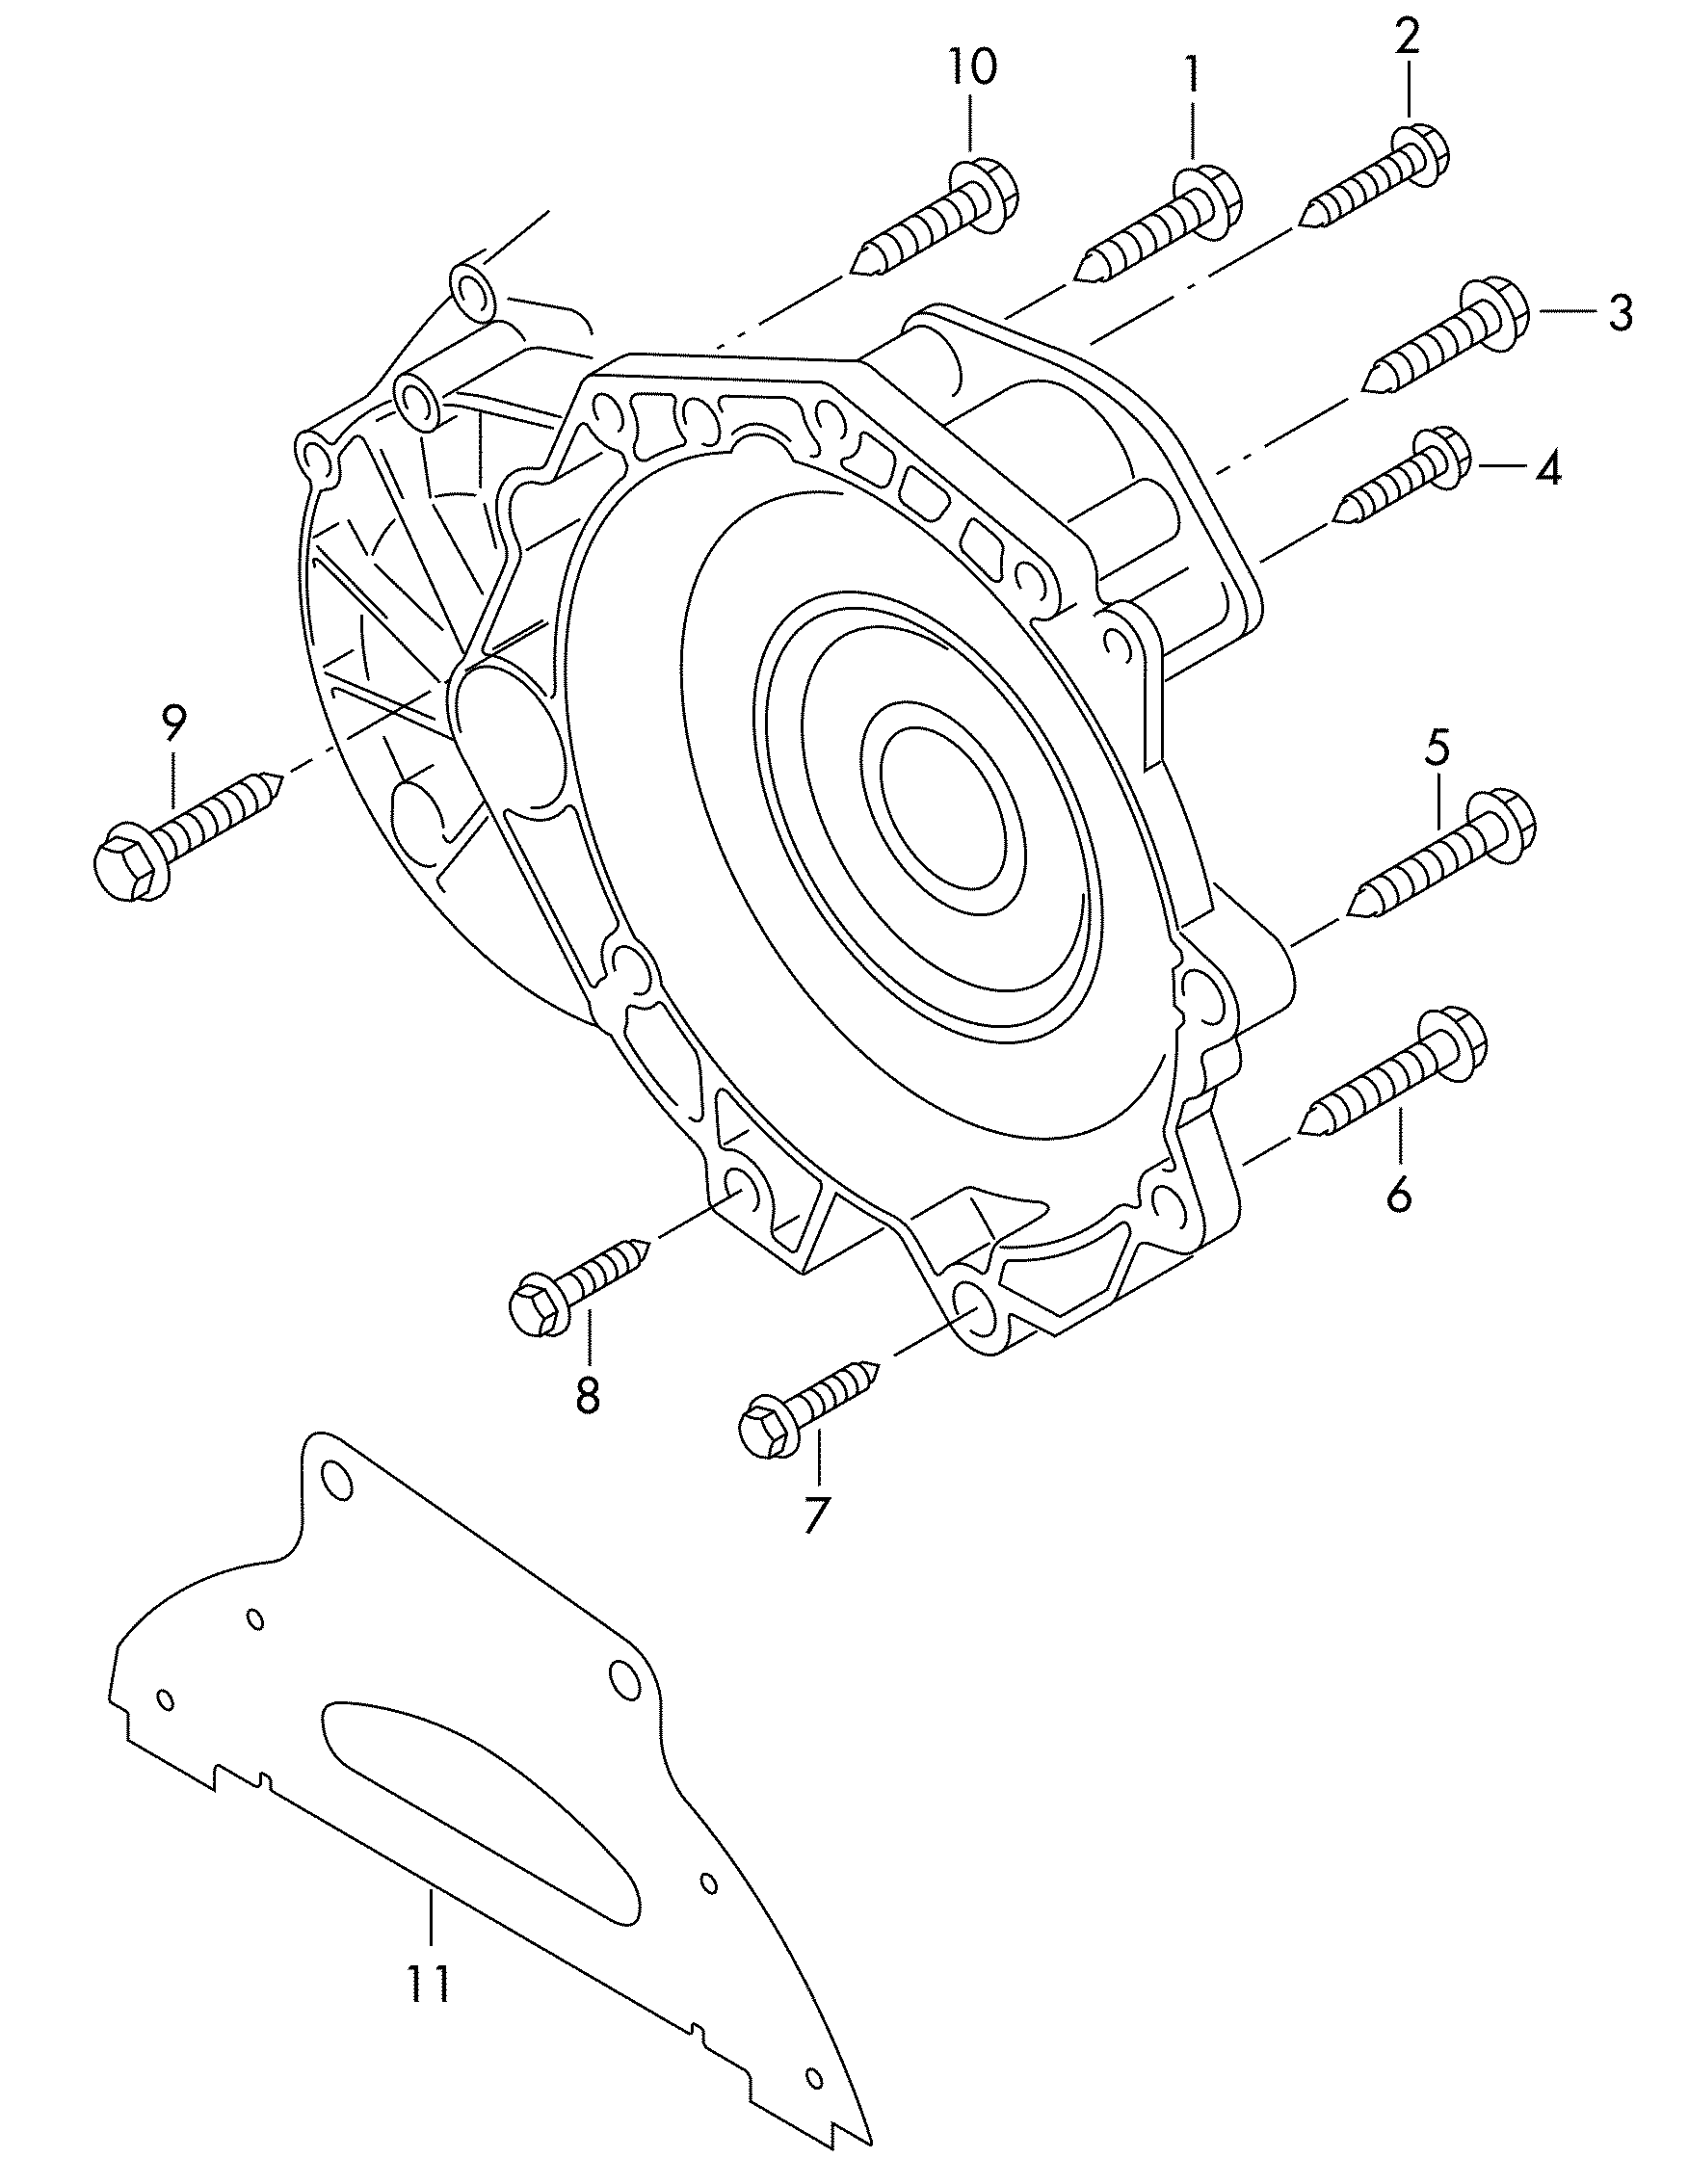 mounting parts for engine and<br>transmissionFor 7-speed dual clutch<br>gearbox  - Yeti - yet